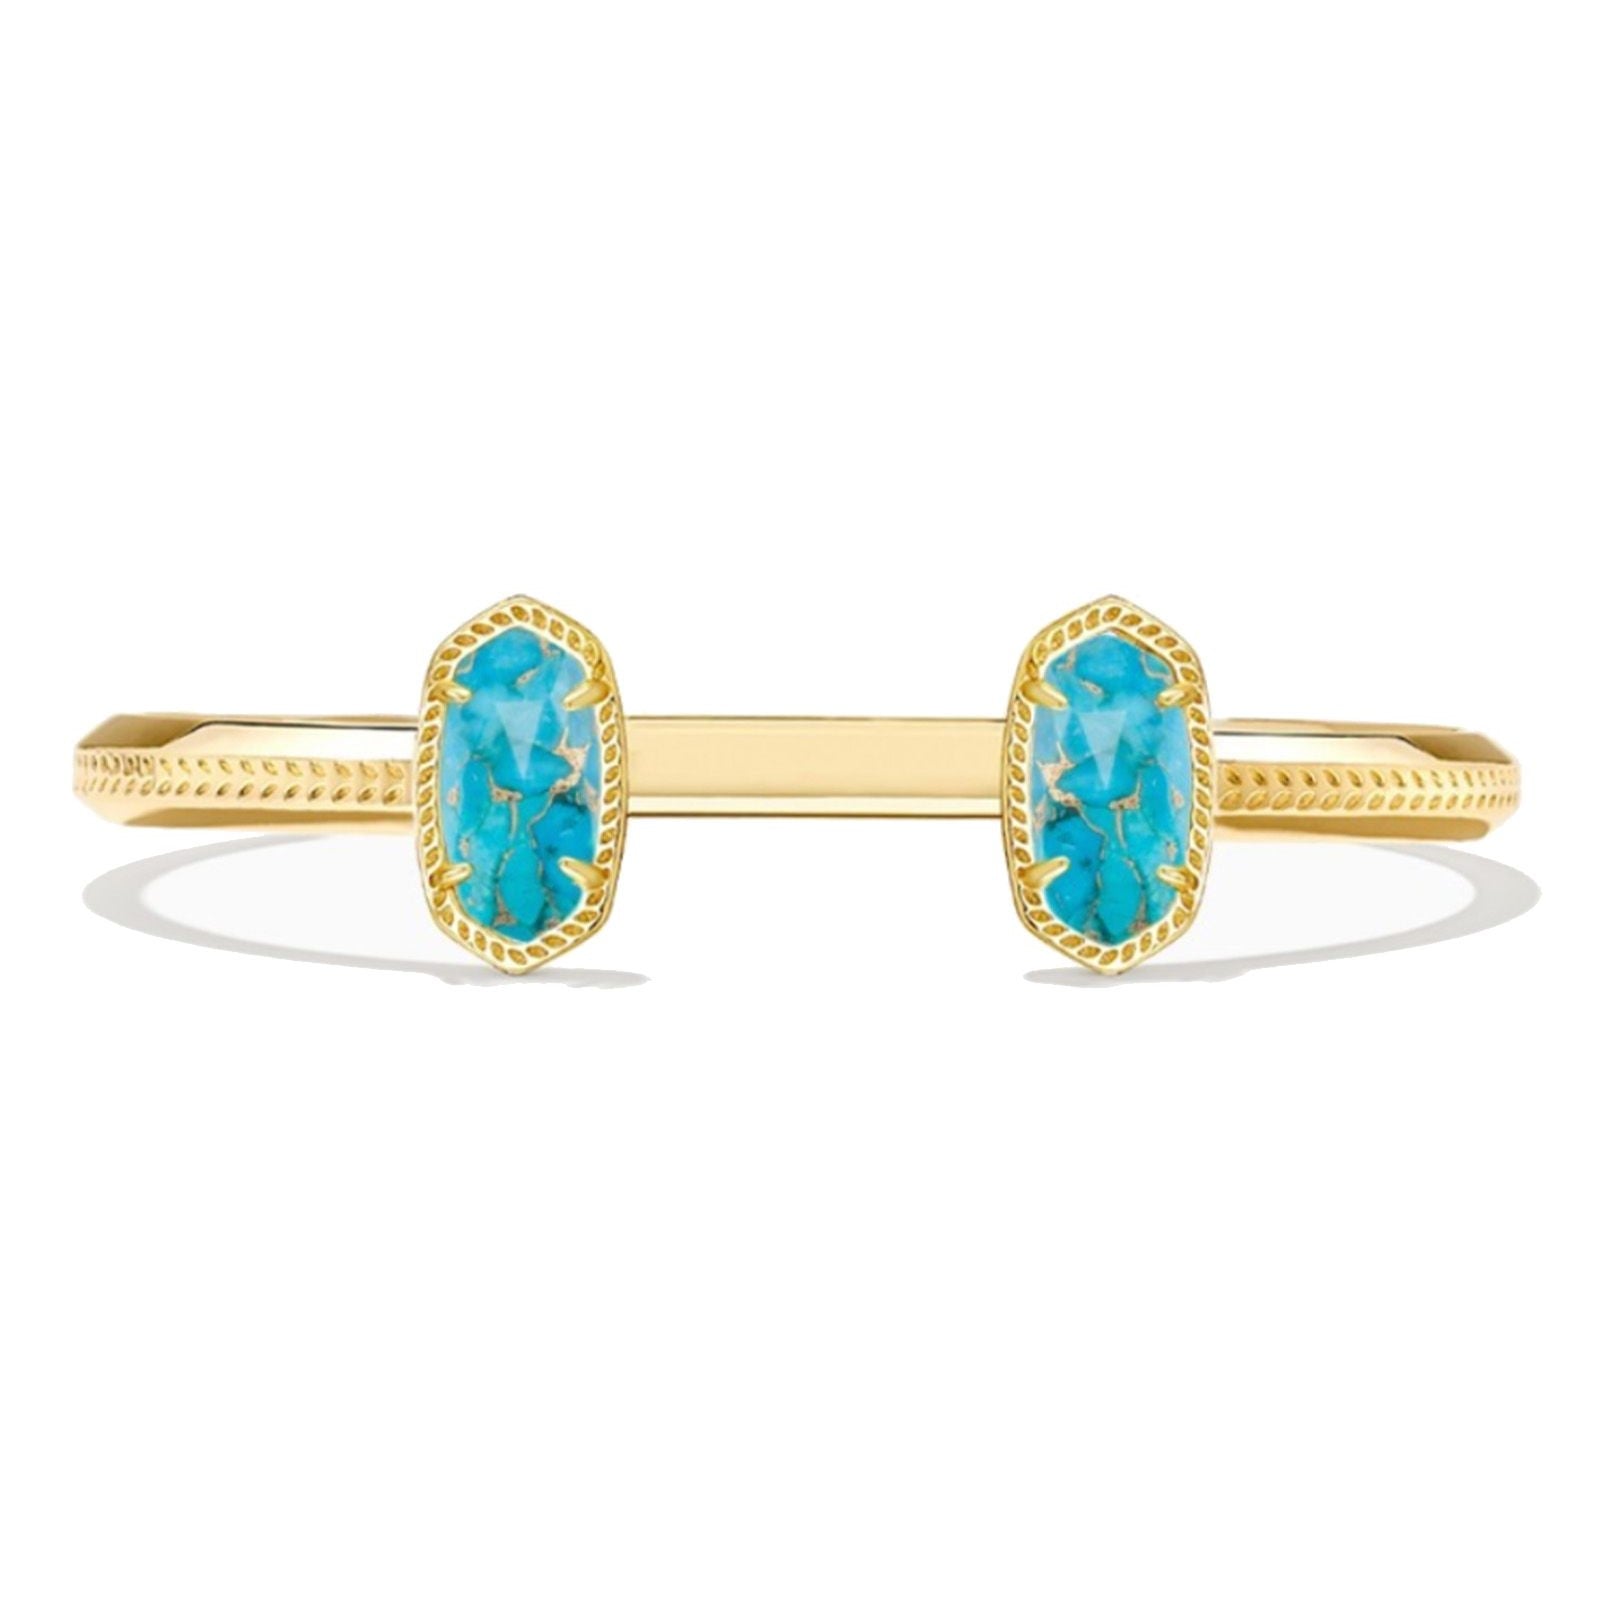 Kendra Scott | Elton Gold Cuff Bracelet in Bronze Veined Turquoise Magnesite - Giddy Up Glamour Boutique